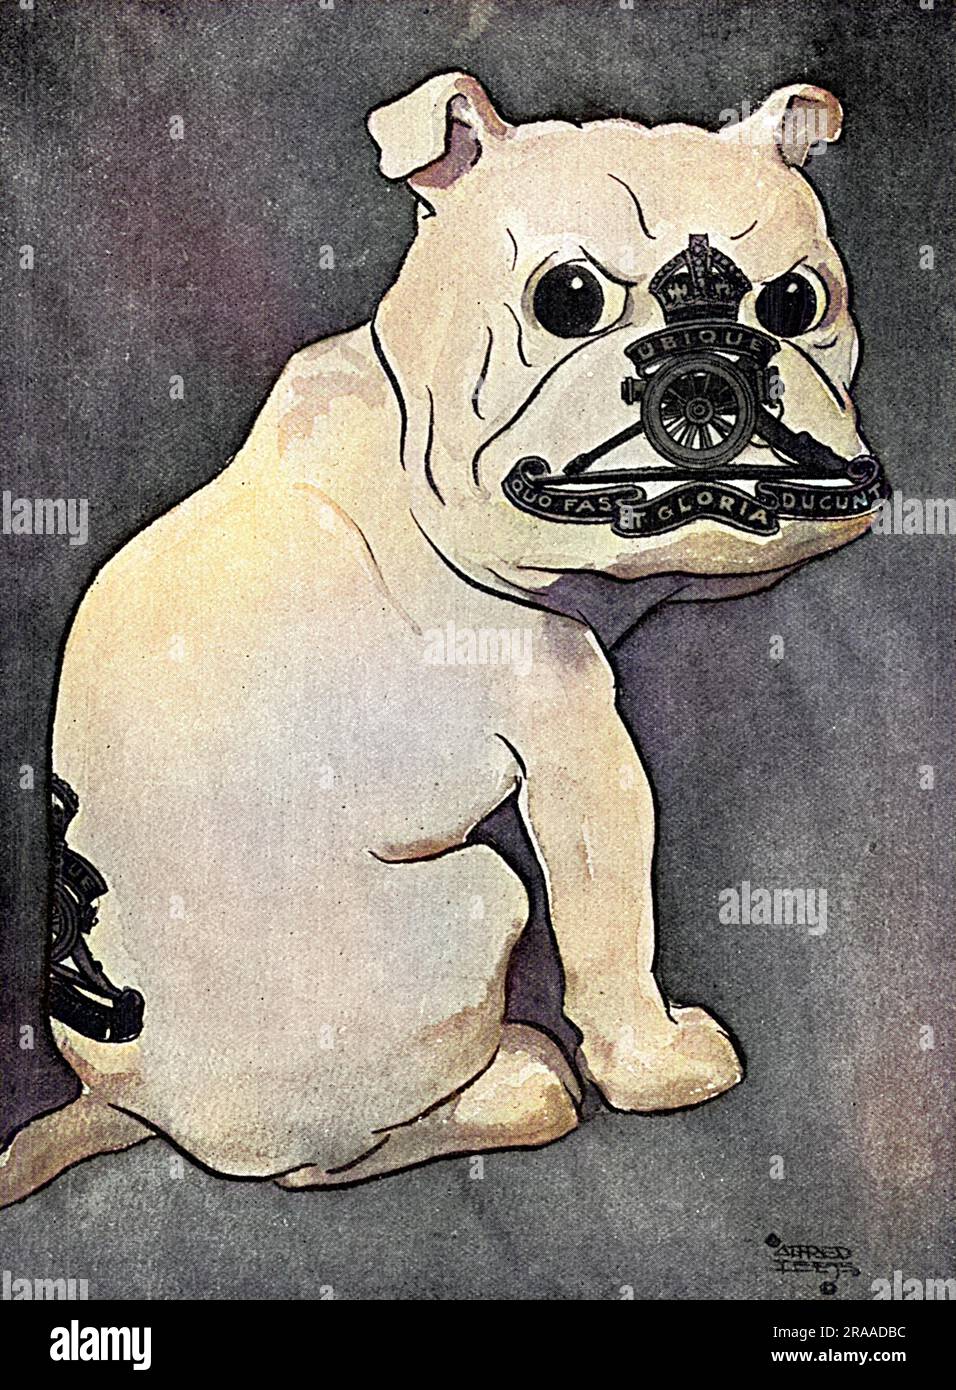 Masbadges!  Regimental mascots and badges in one!  No. 10 The bulldog of the Royal Artillery.     Date: 1918 Stock Photo